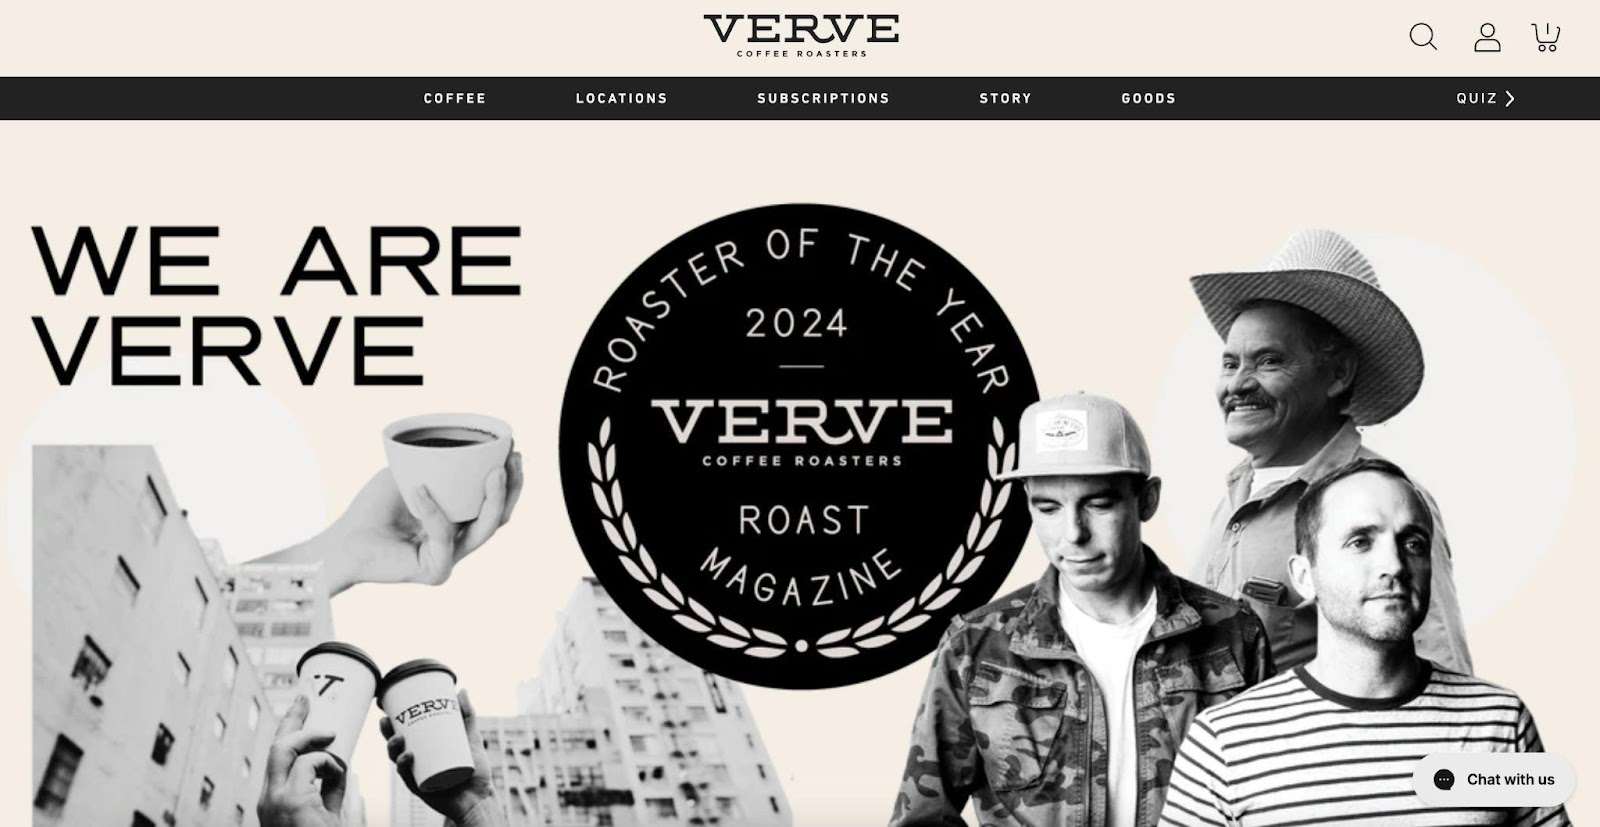 Verve is an example of a multi-faceted business that personalizes the shopping experience with engaging content.